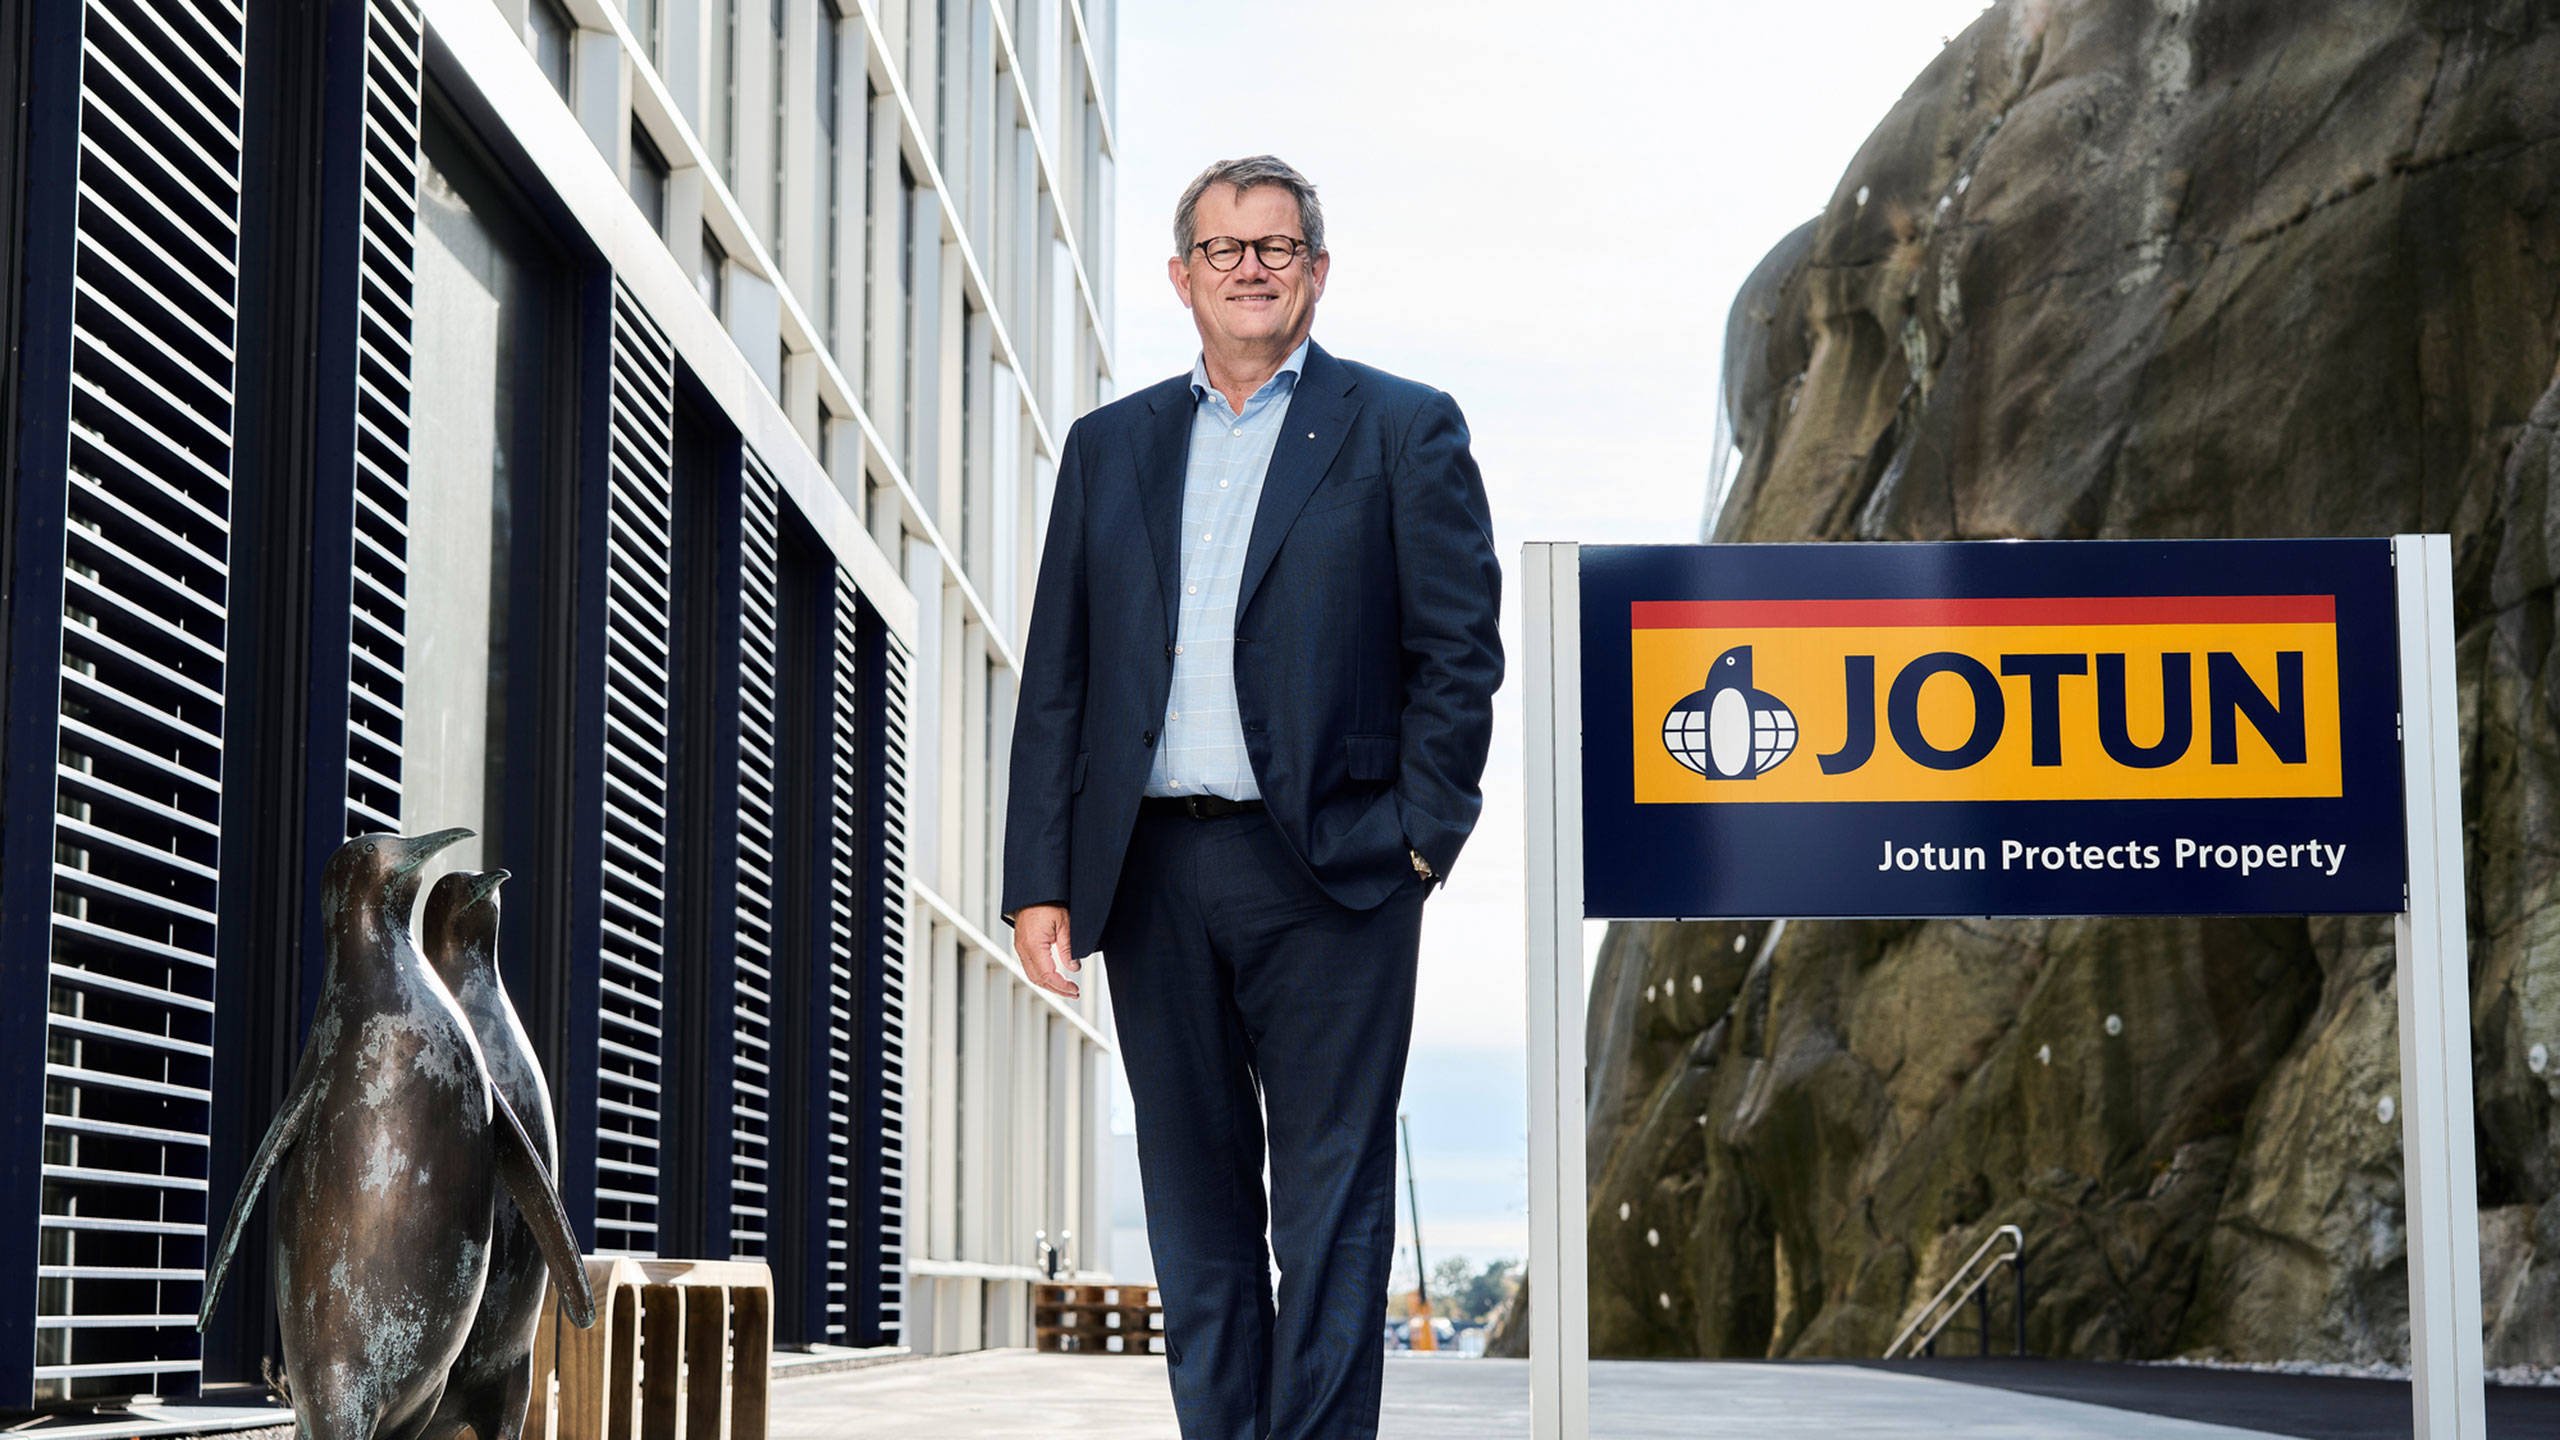 President and CEO Morten Fon at Jotun's headquarters in Sandefjord, Norway